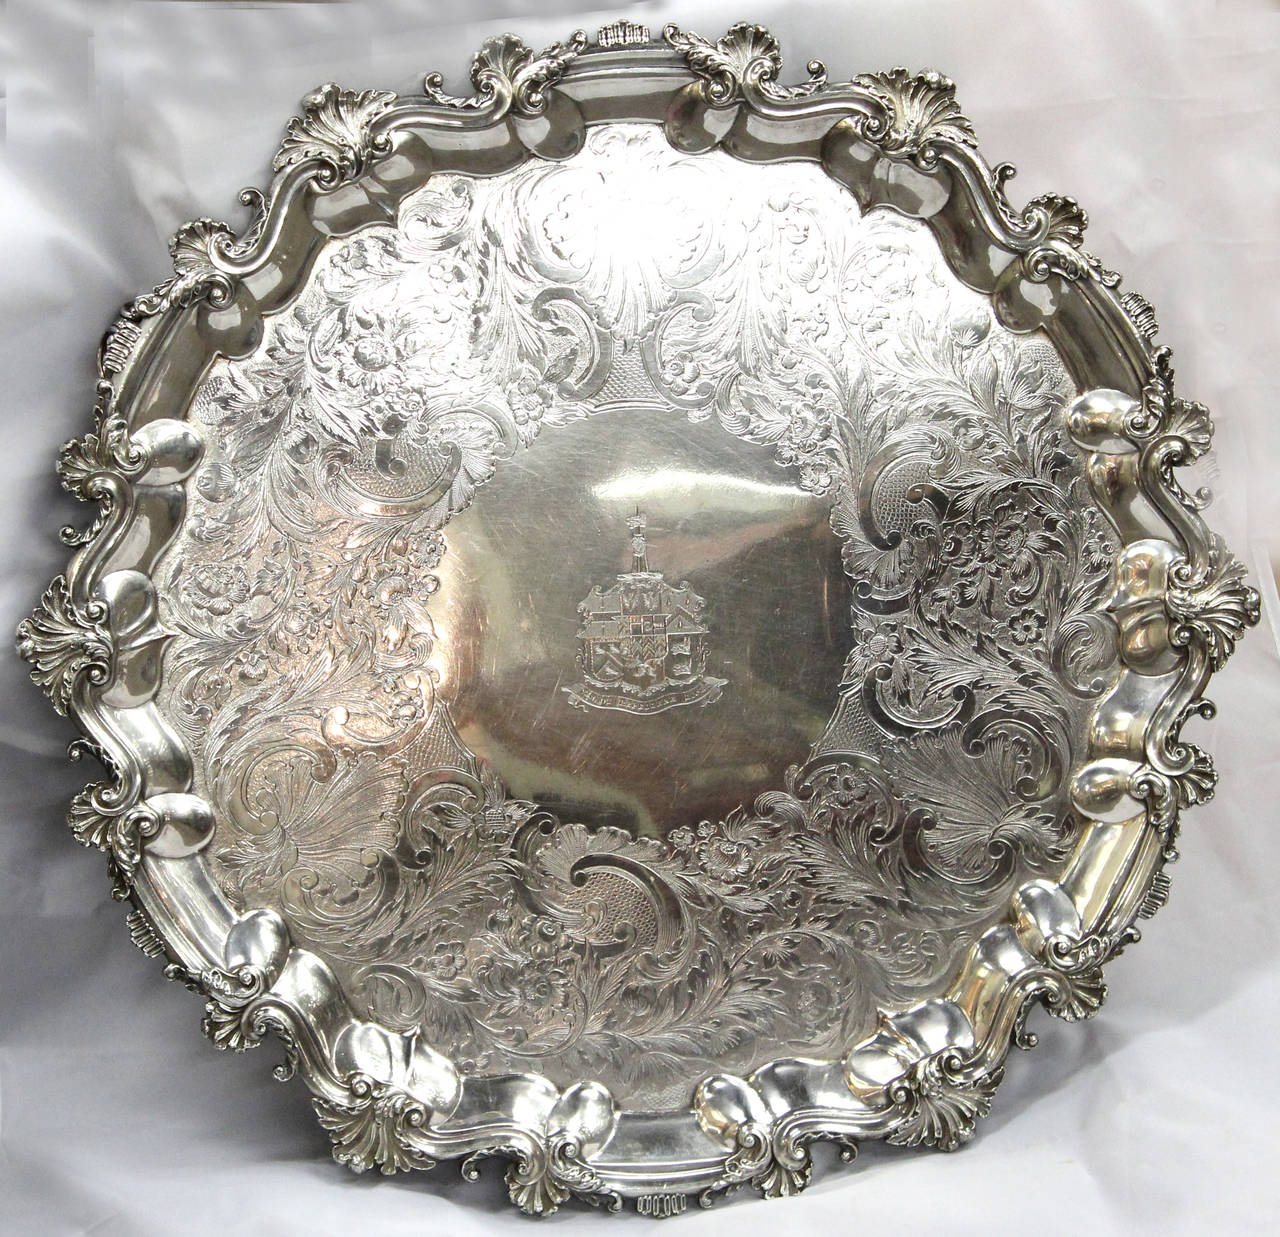 A large 19th century English Sheffield silver four-footed salver or tray, with beautiful chased scroll and floral decoration, including a family crest in the center with Latin motto “Vim Vi Repellere Licet,” translating to “We may repel force with